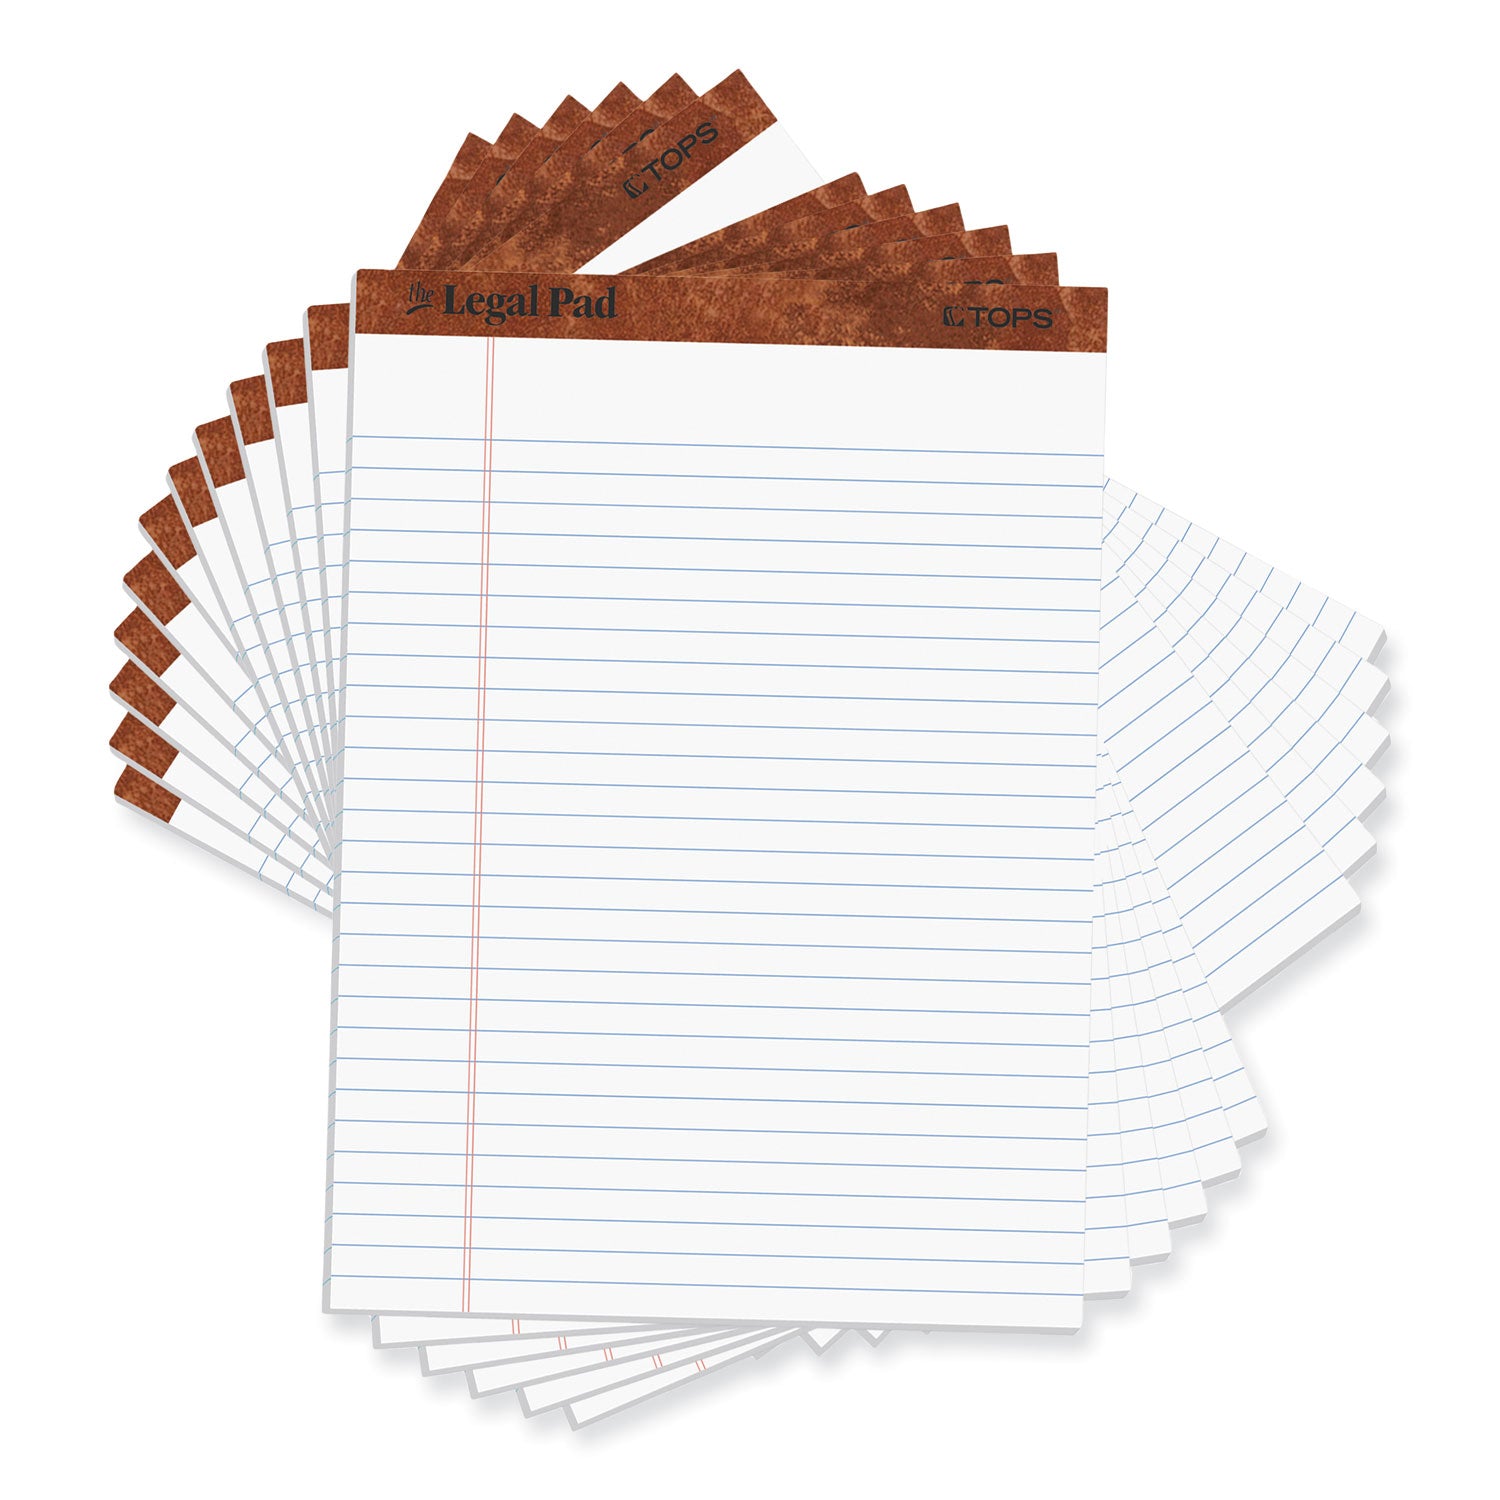 The Legal Pad" Ruled Perforated Pads, Wide/Legal Rule, 50 White 8.5 x 11.75 Sheets, Dozen - 